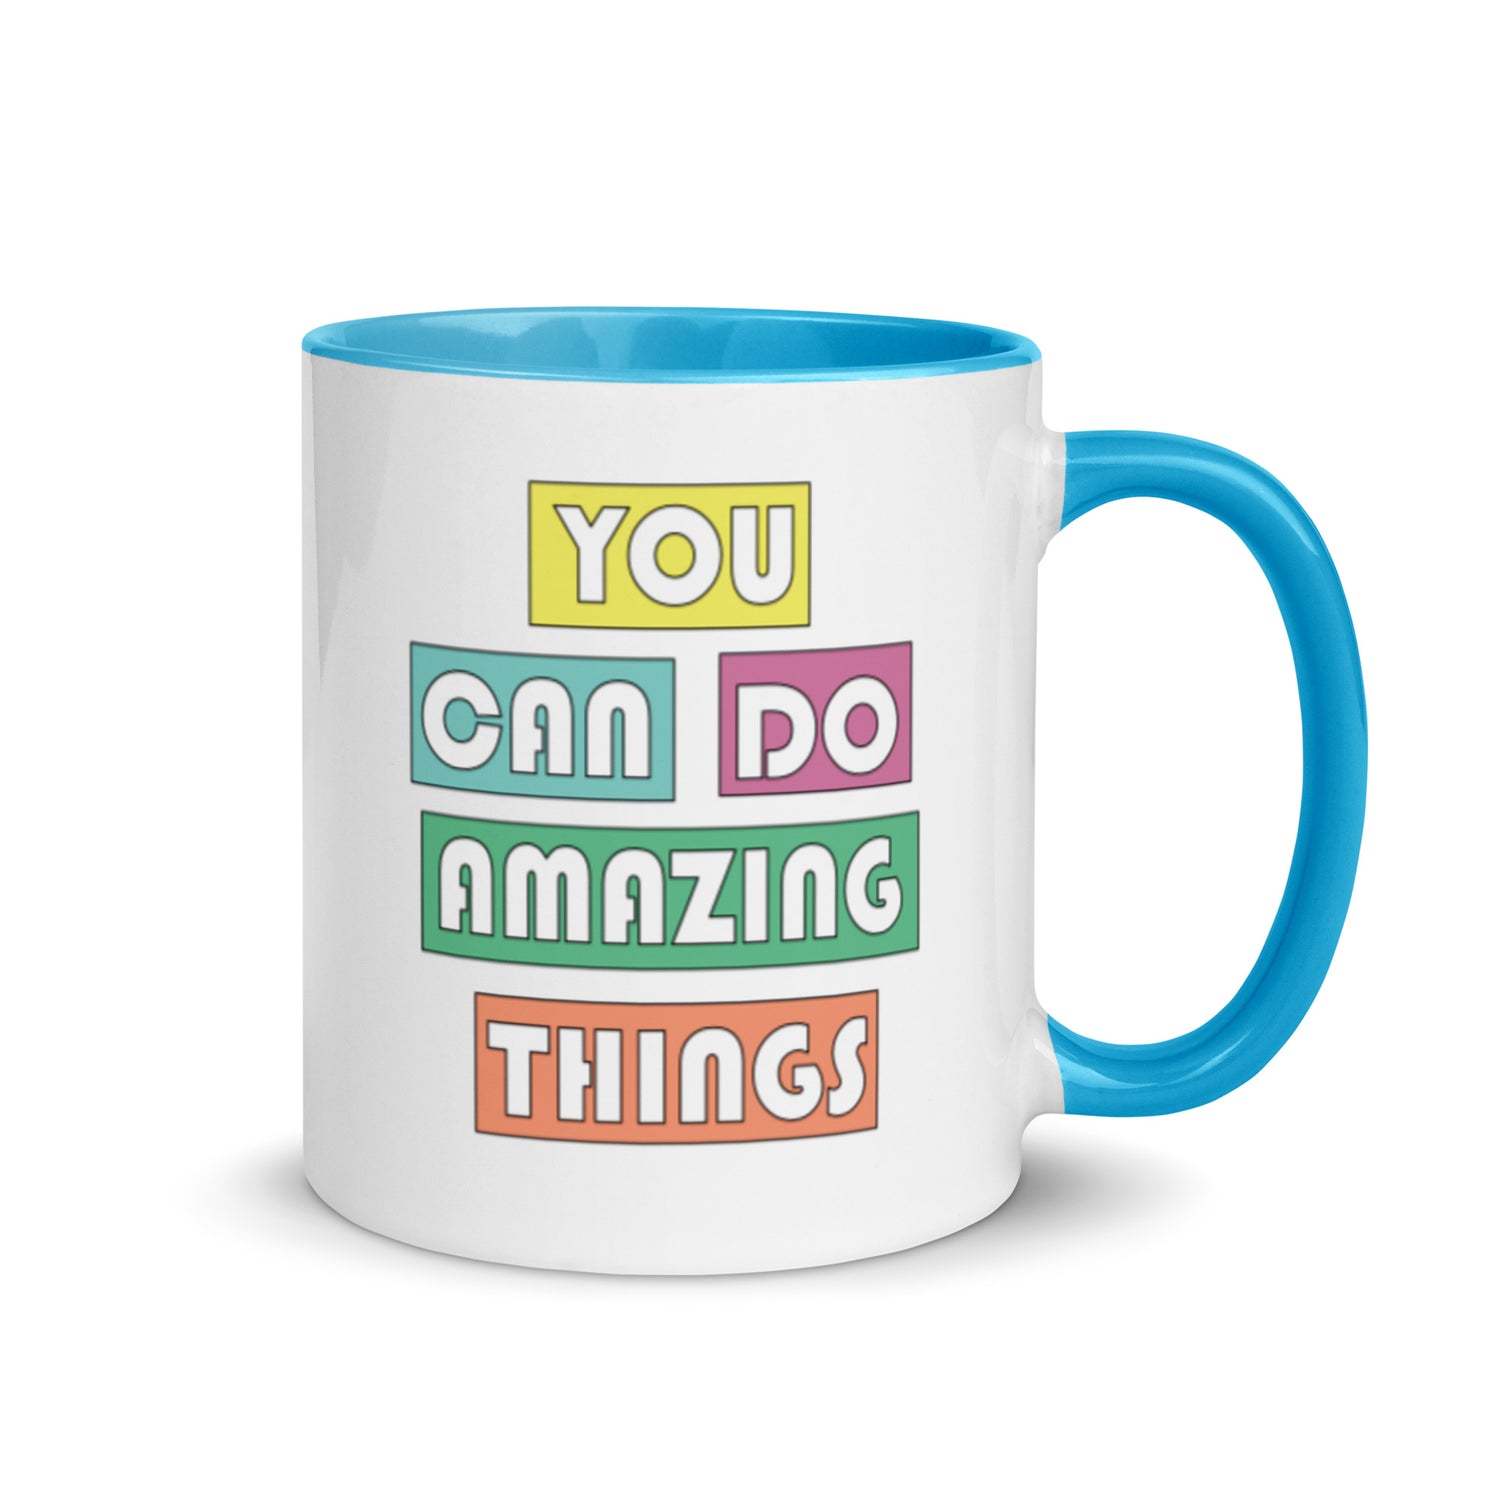 you can do amazing things mug with teal interior